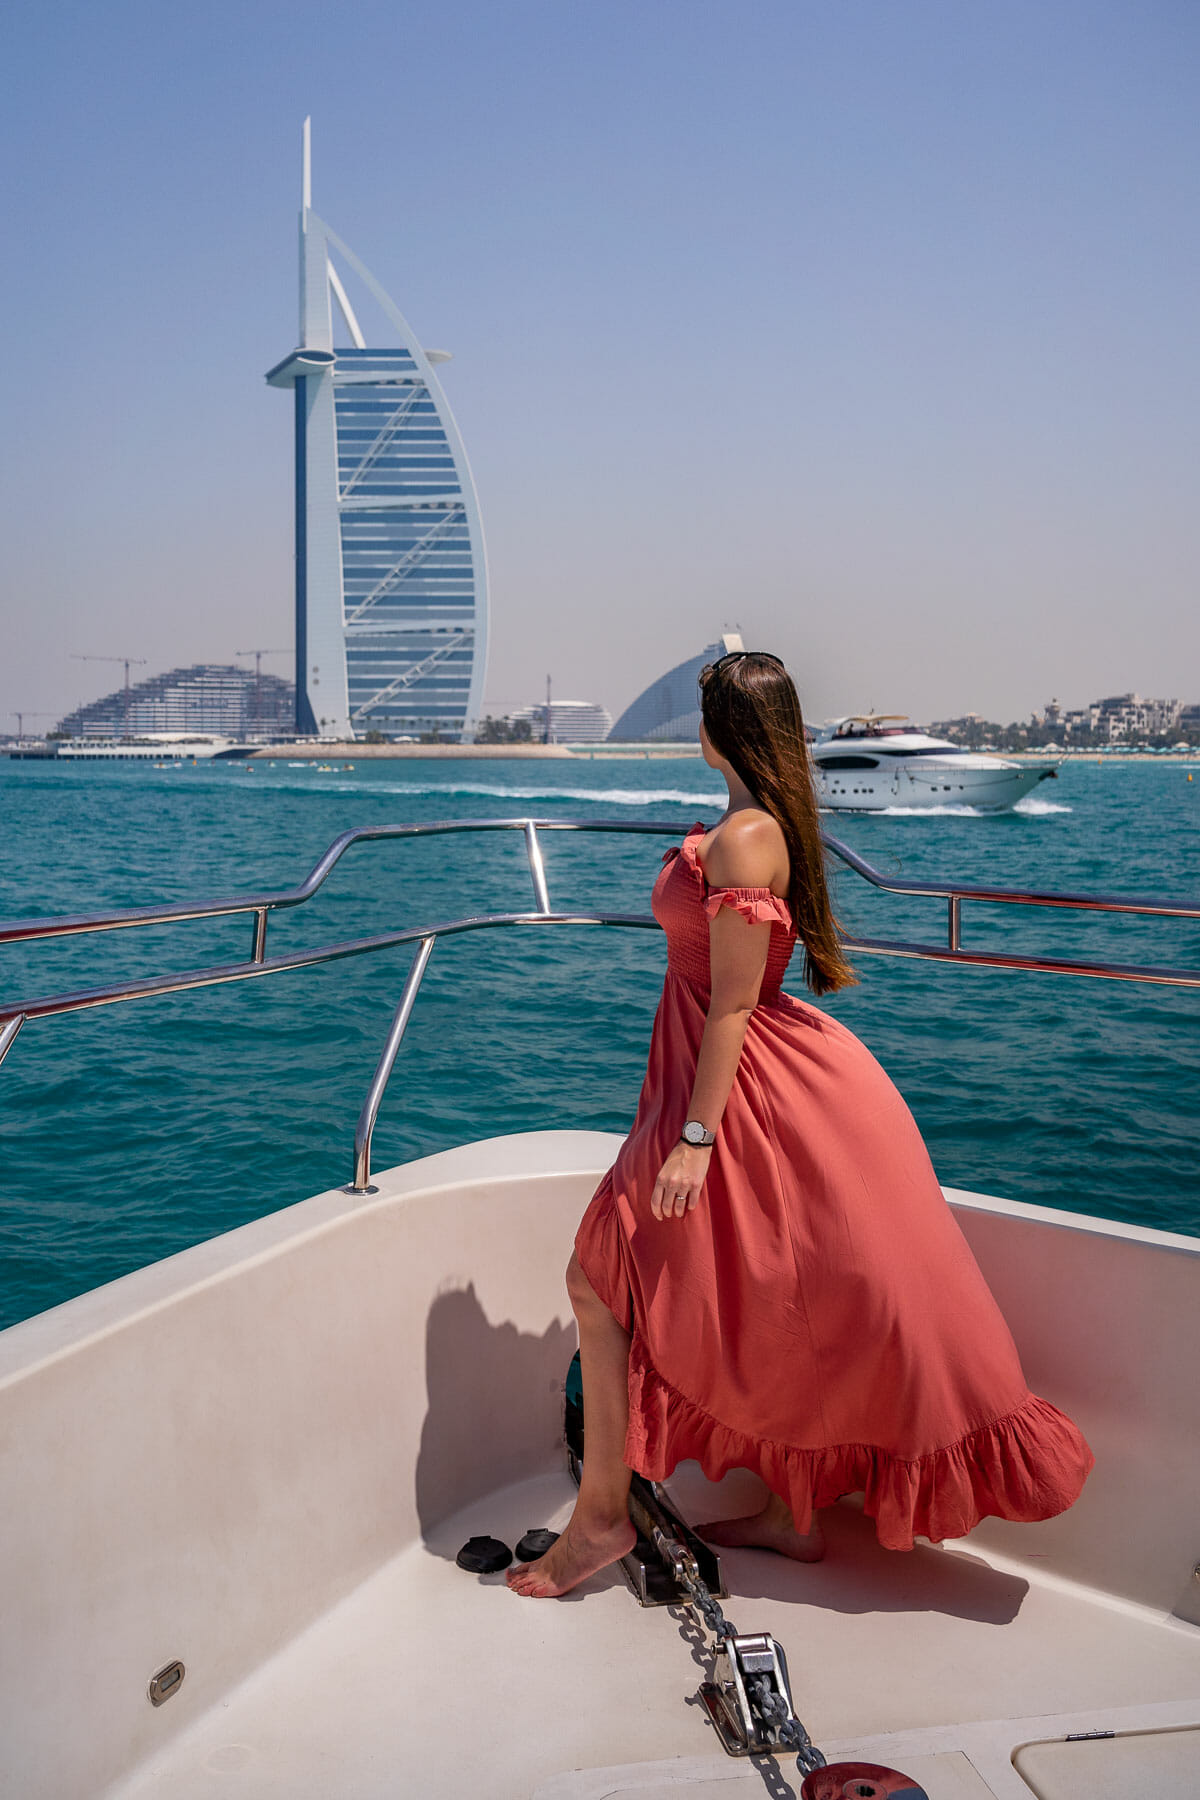 Girl on a yacht with Burj al Arab in the background